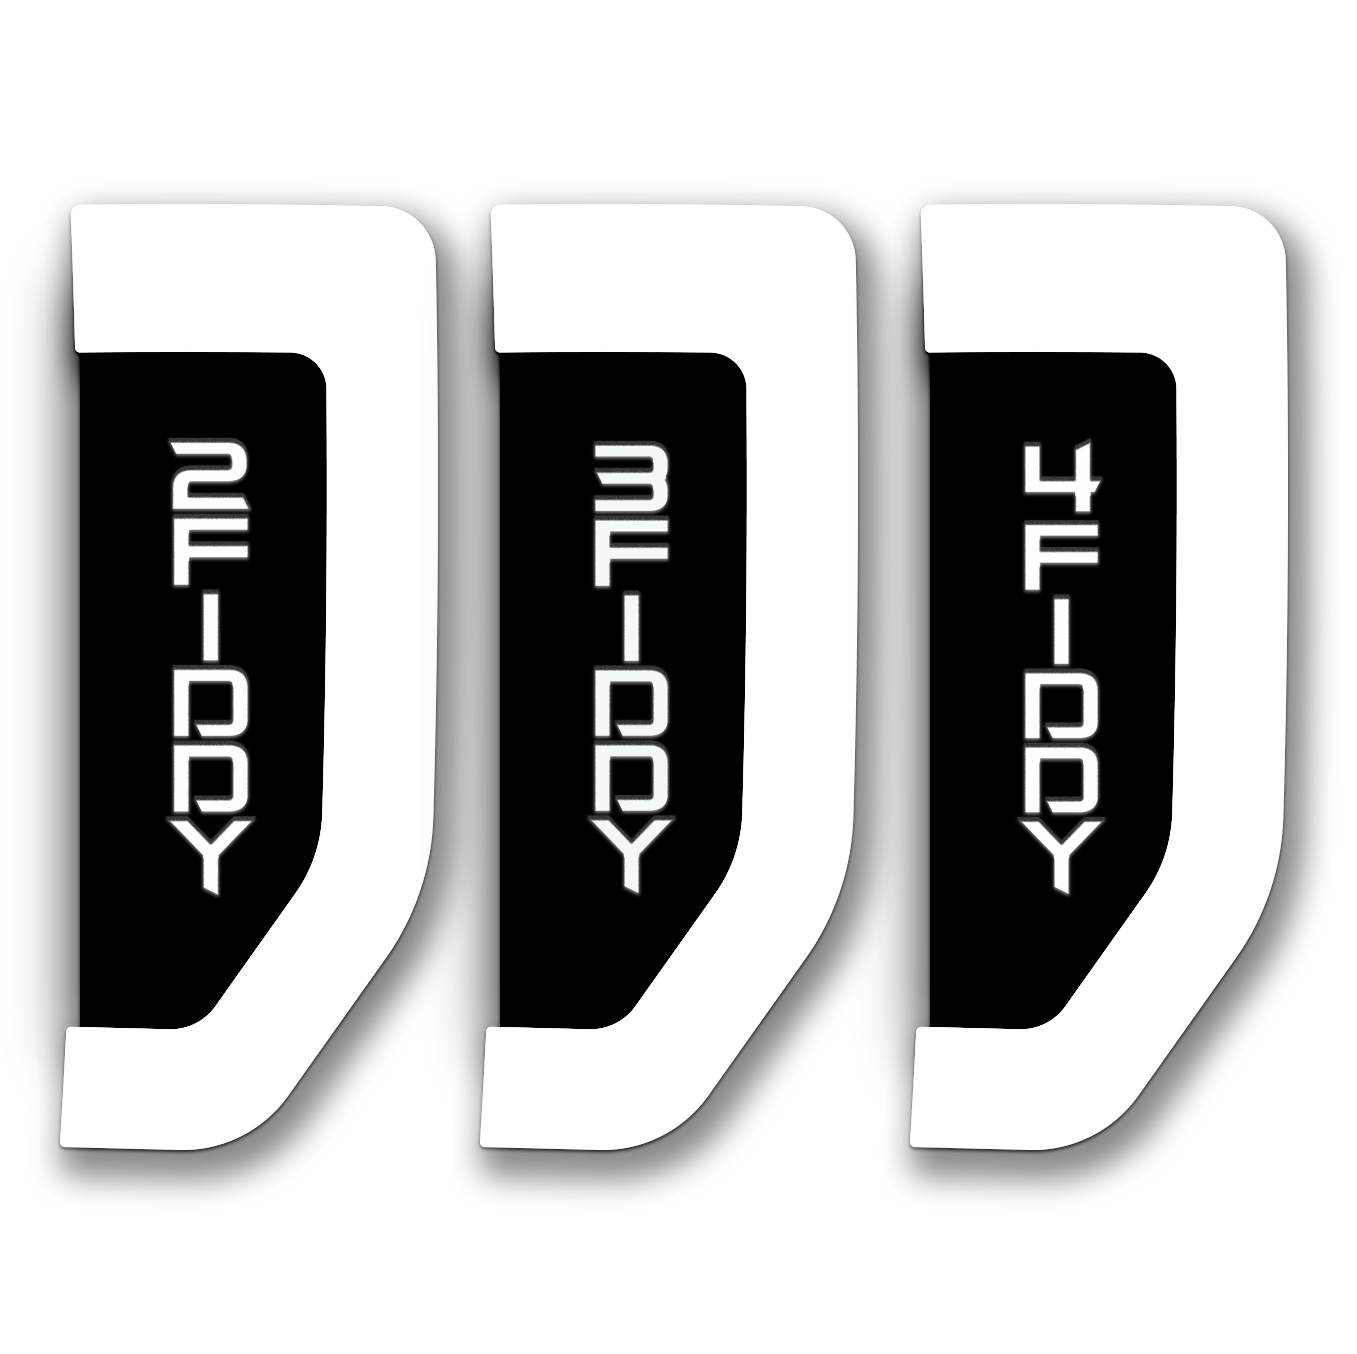 2Fiddy, 3Fiddy, or 4Fiddy 2017-2022 Ford® Super Duty® Fender Badge Replacement Set - Fully Customizable - LED and Non-LED